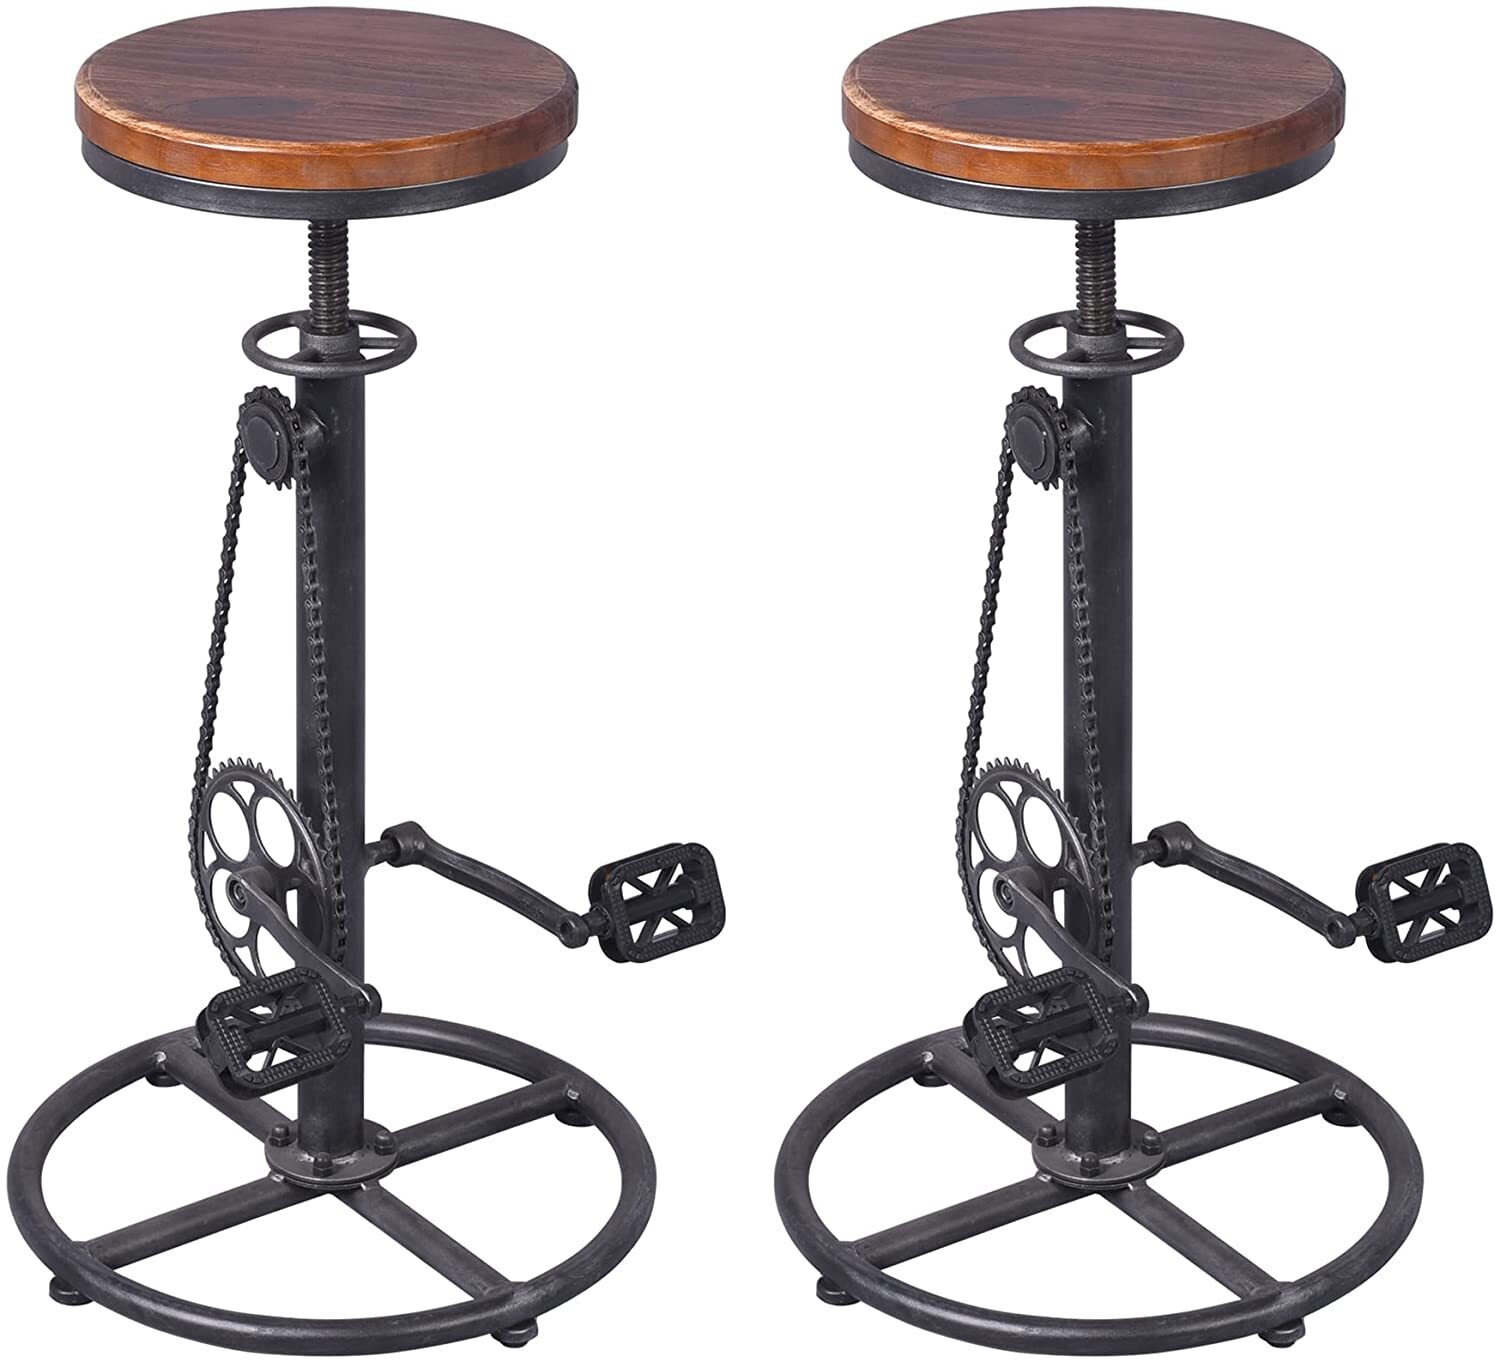 Steampunk Bar Stools With Bike Pedals